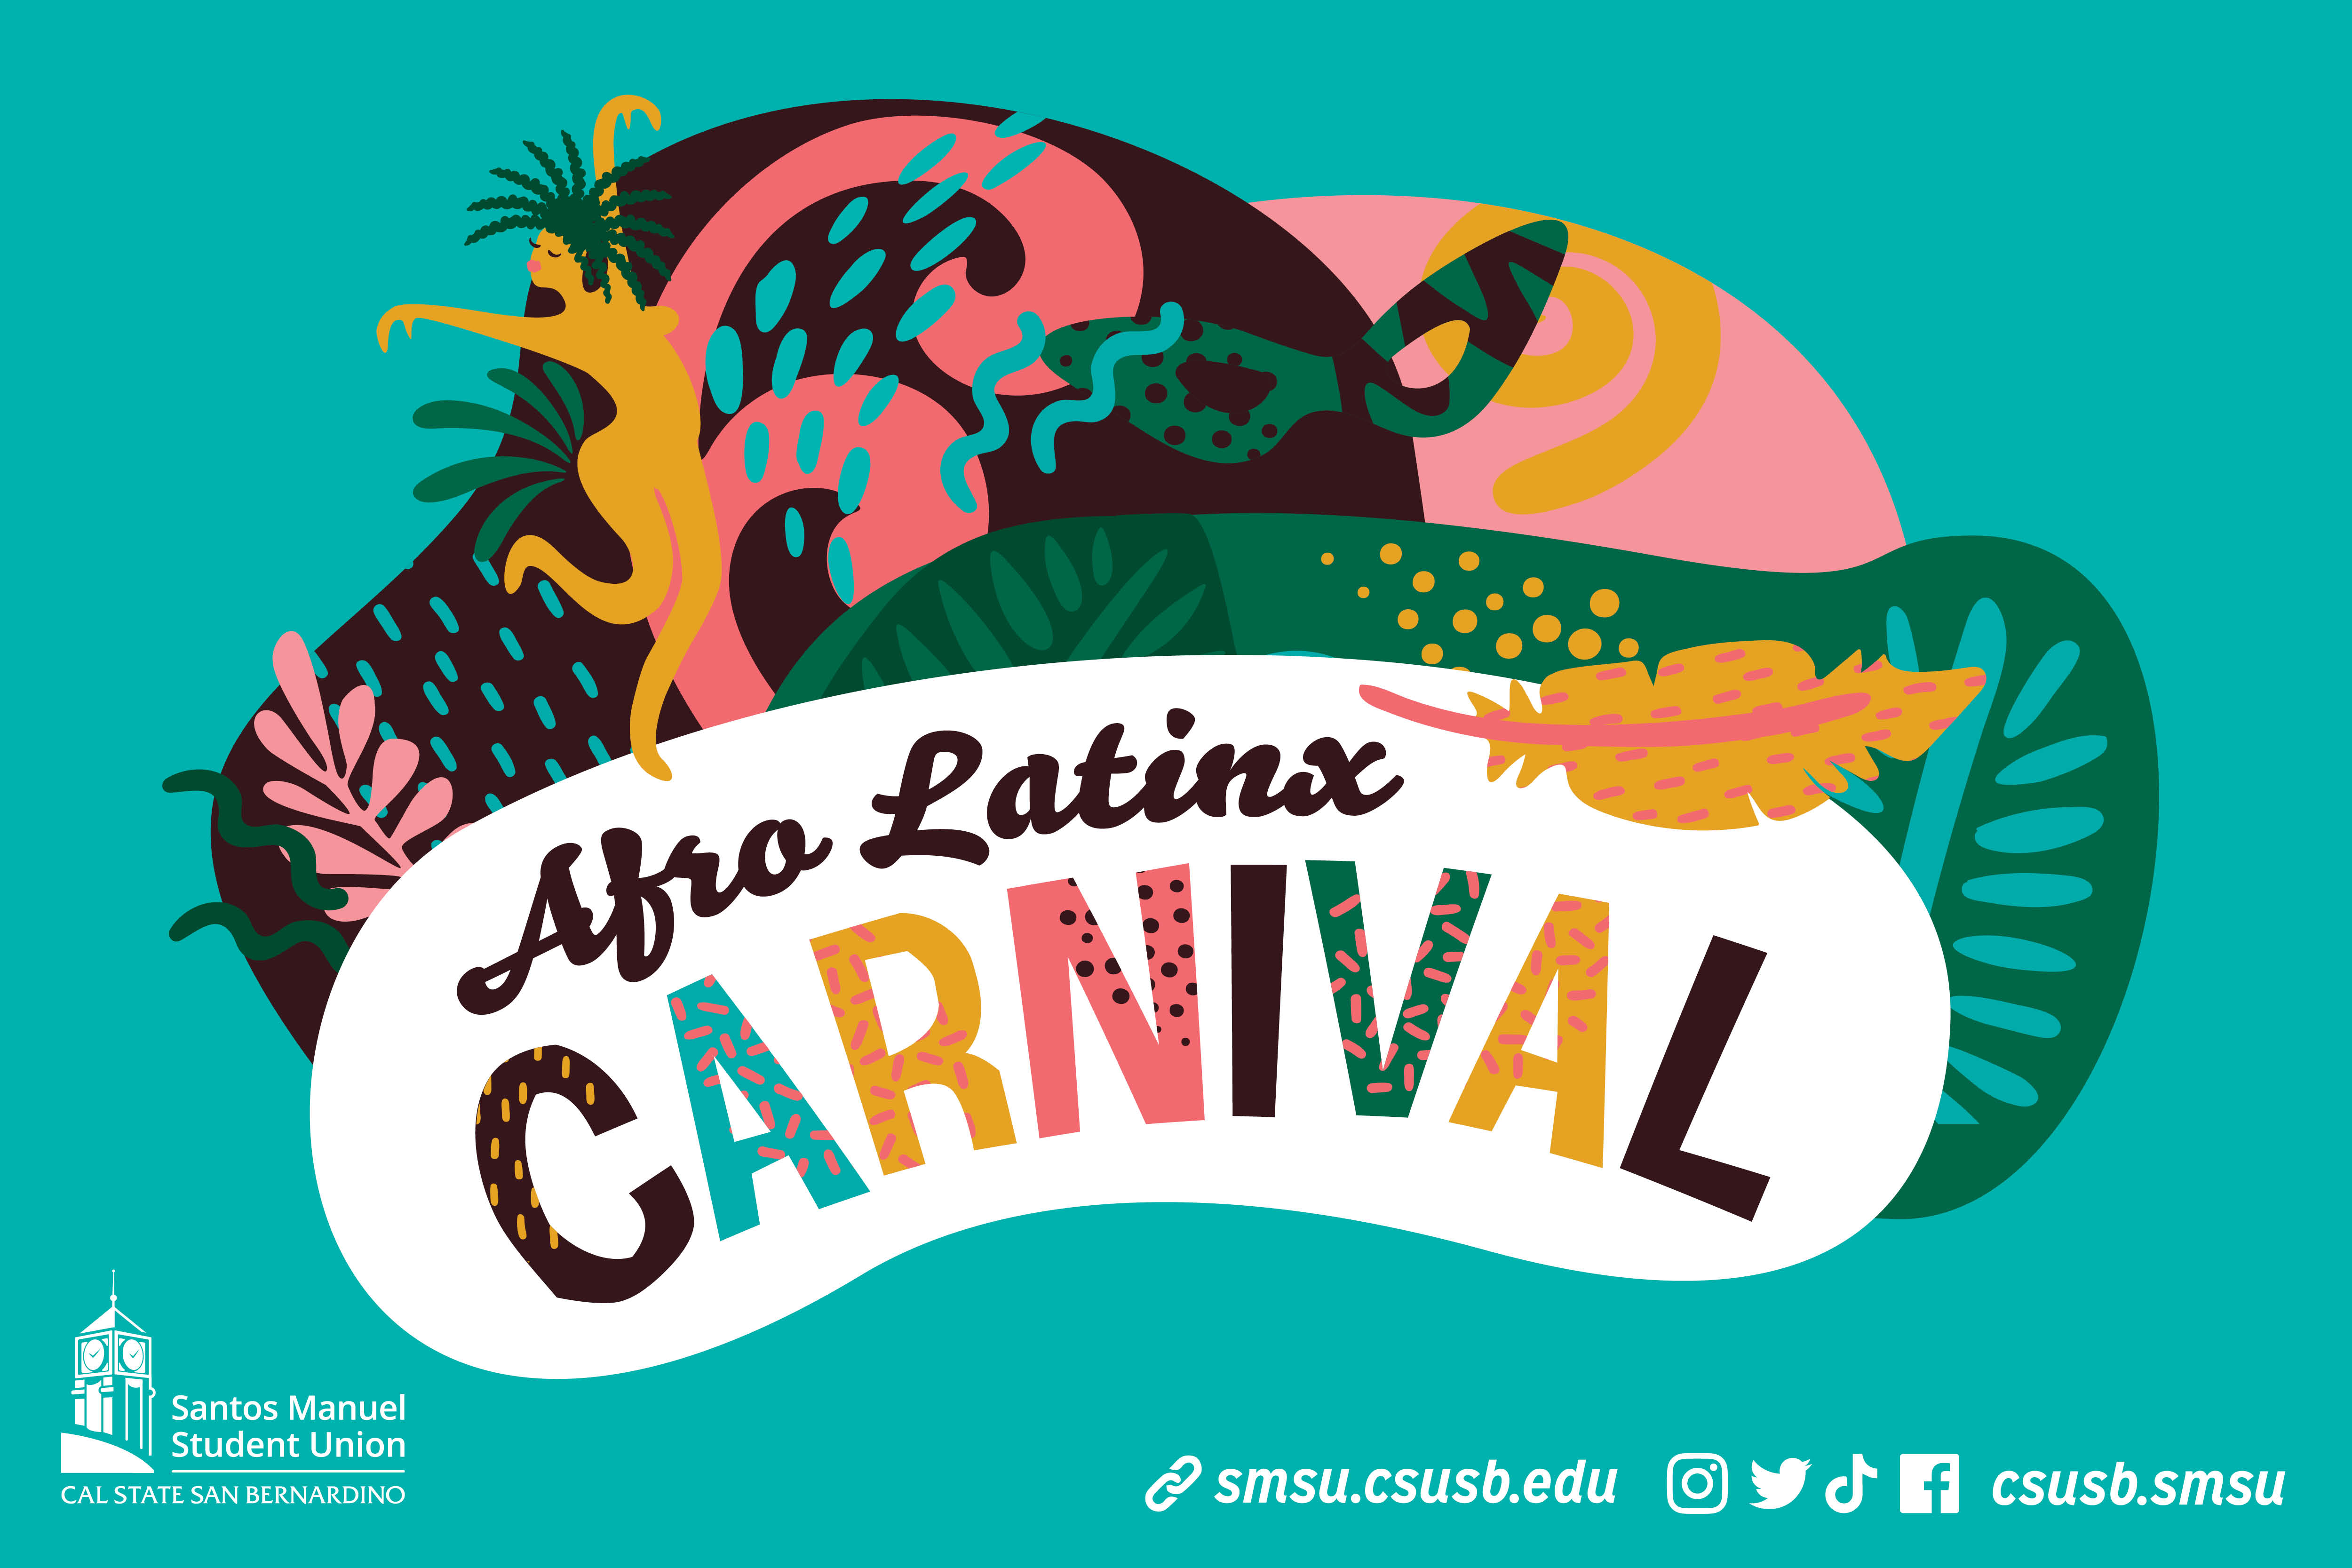 Colorful AfroLatinx Carnival flyer with Santos Manuel Student Union logos and social media handles.